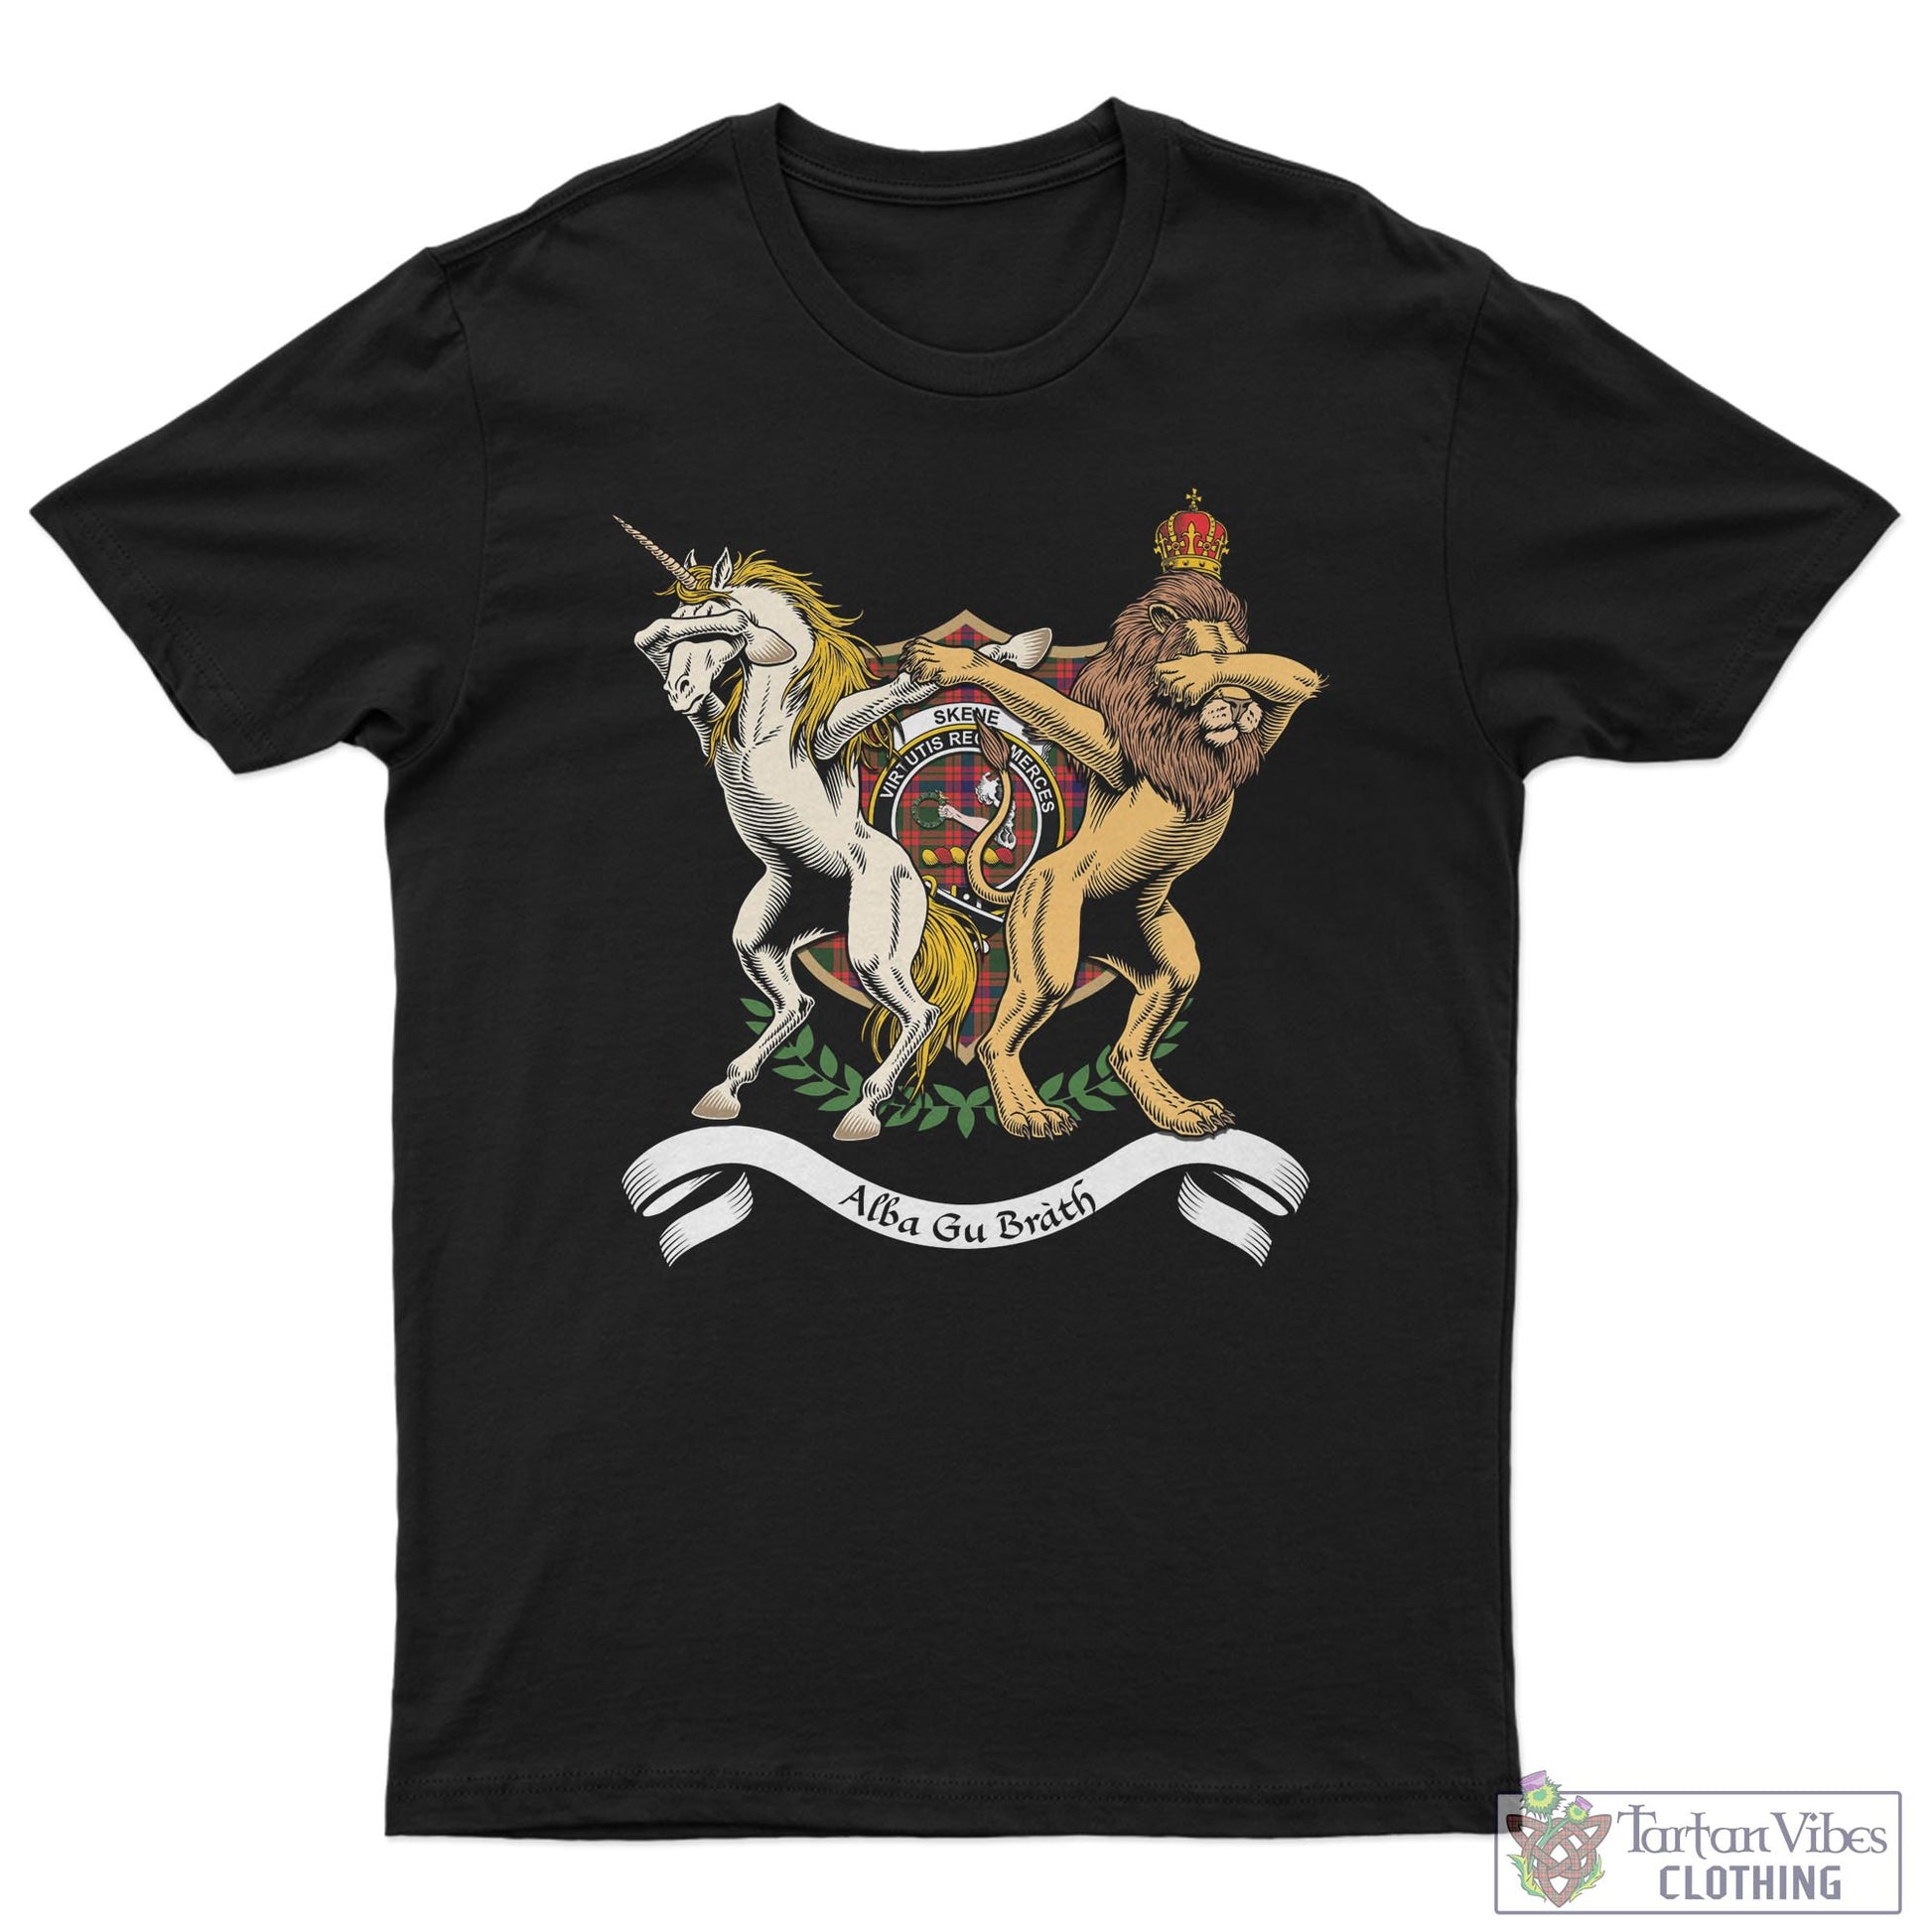 Tartan Vibes Clothing Skene Modern Family Crest Cotton Men's T-Shirt with Scotland Royal Coat Of Arm Funny Style